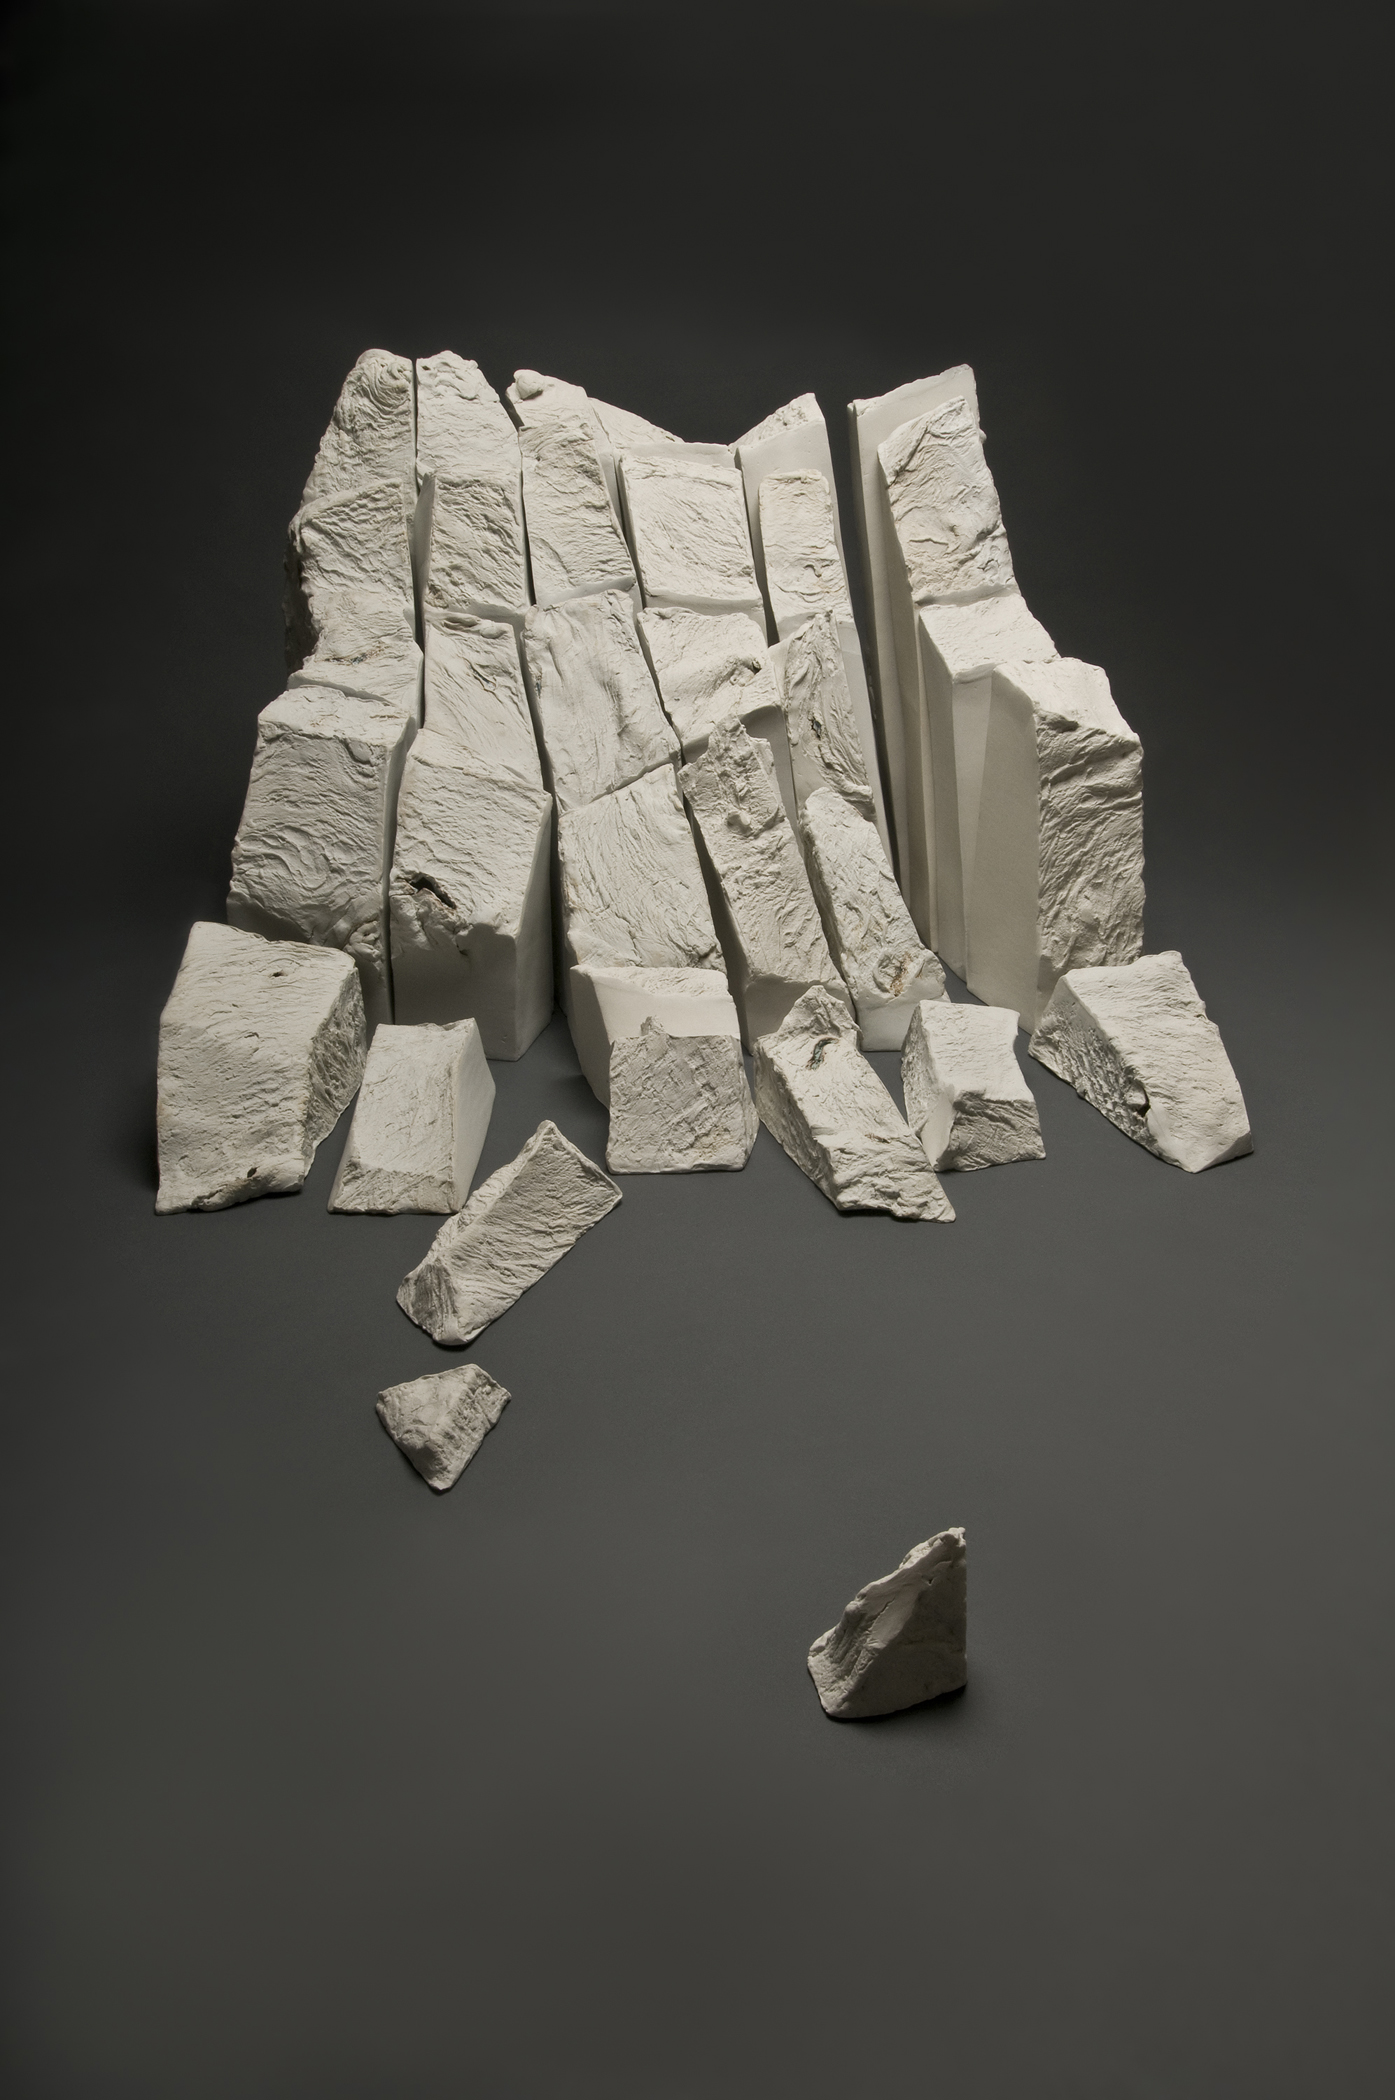 Paula Winokur, <i>Calving Gracier</i> (2010). 33 Porcelain sections. Dimensions: 6’ w X 8’ d (base), variable heights to 36”. Collection: Racine Art Museum, Wisconsin. ©Paula Winokur 2010. Courtesy of the artist.